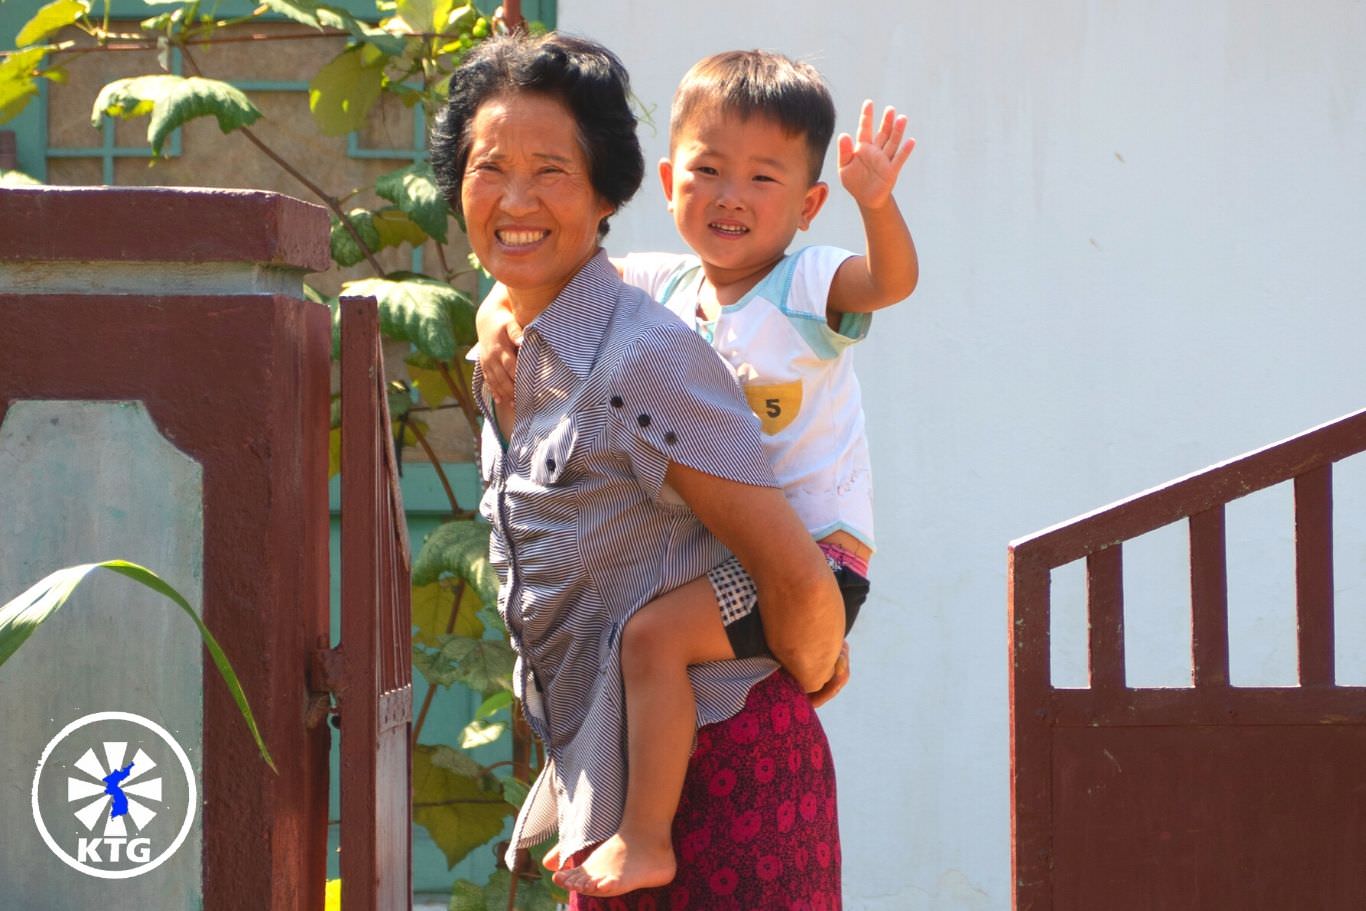 Grandmother and grandson in a cooperative farm near Nampo city in North Korea. Trip arranged by KTG Tours